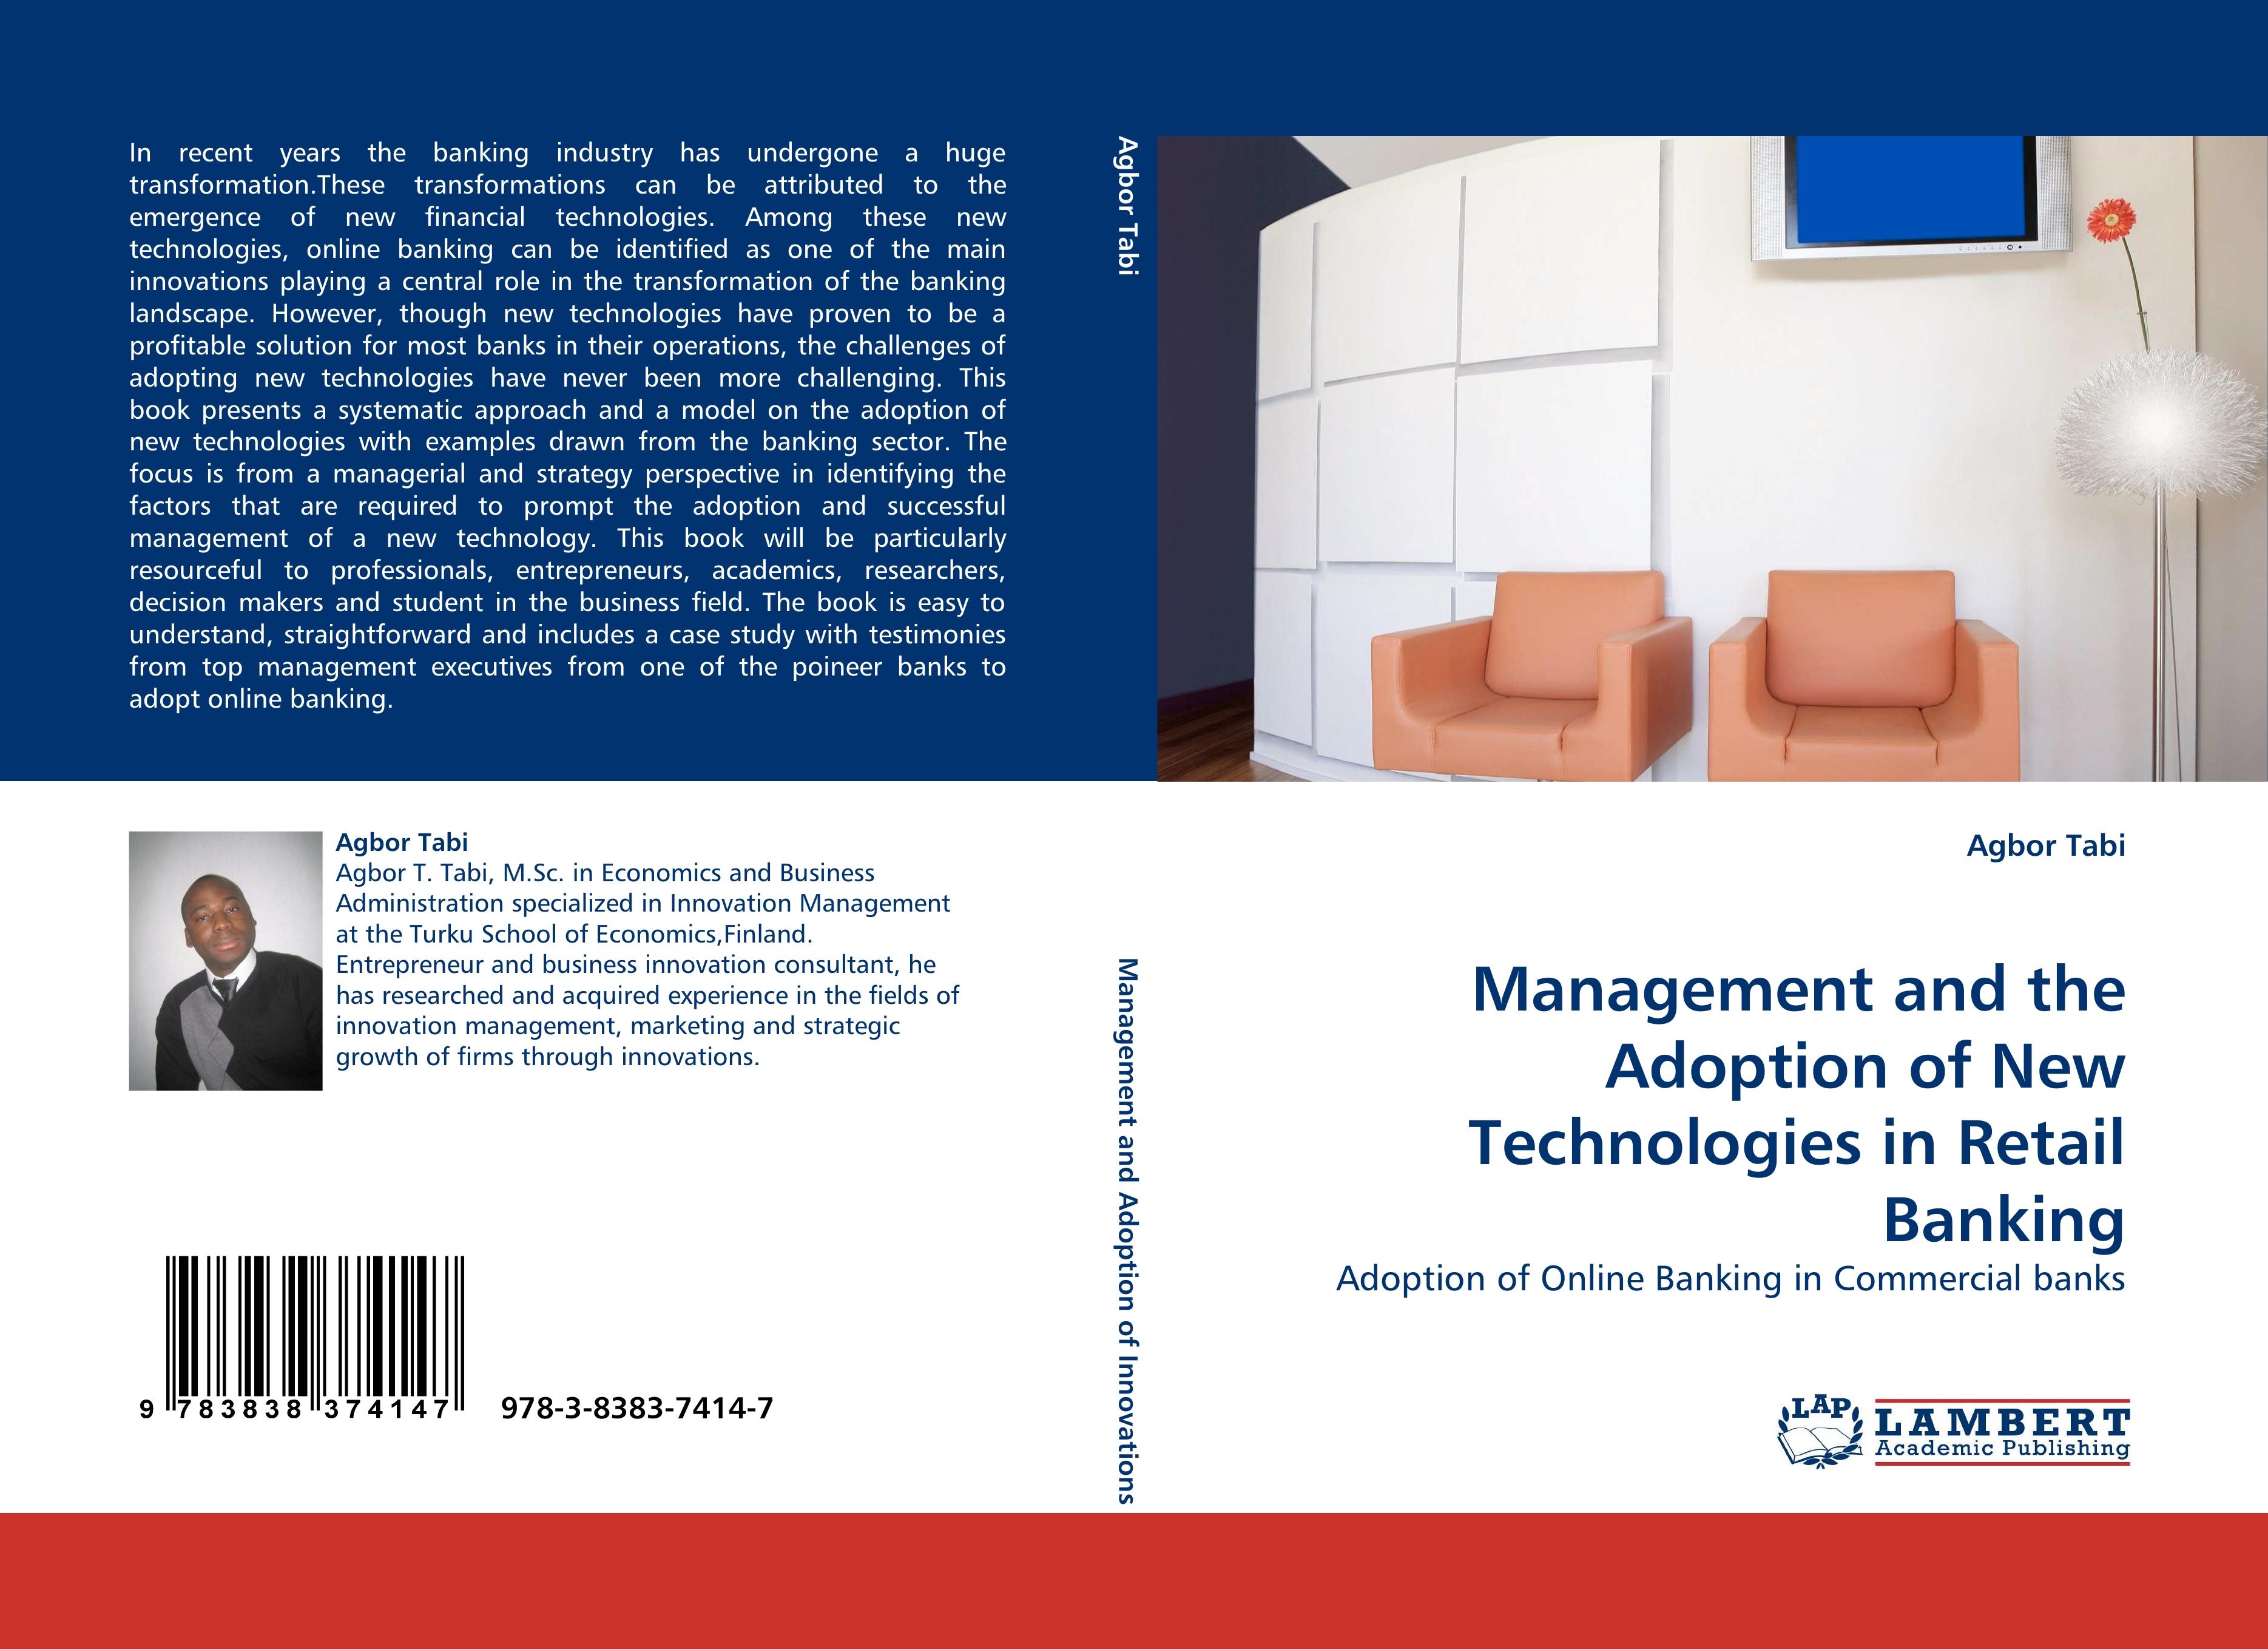 Management and the Adoption of New Technologies in Retail Banking / Adoption of Online Banking in Commercial banks / Agbor Tabi / Taschenbuch / Paperback / 108 S. / Englisch / 2010 / EAN 9783838374147 - Tabi, Agbor